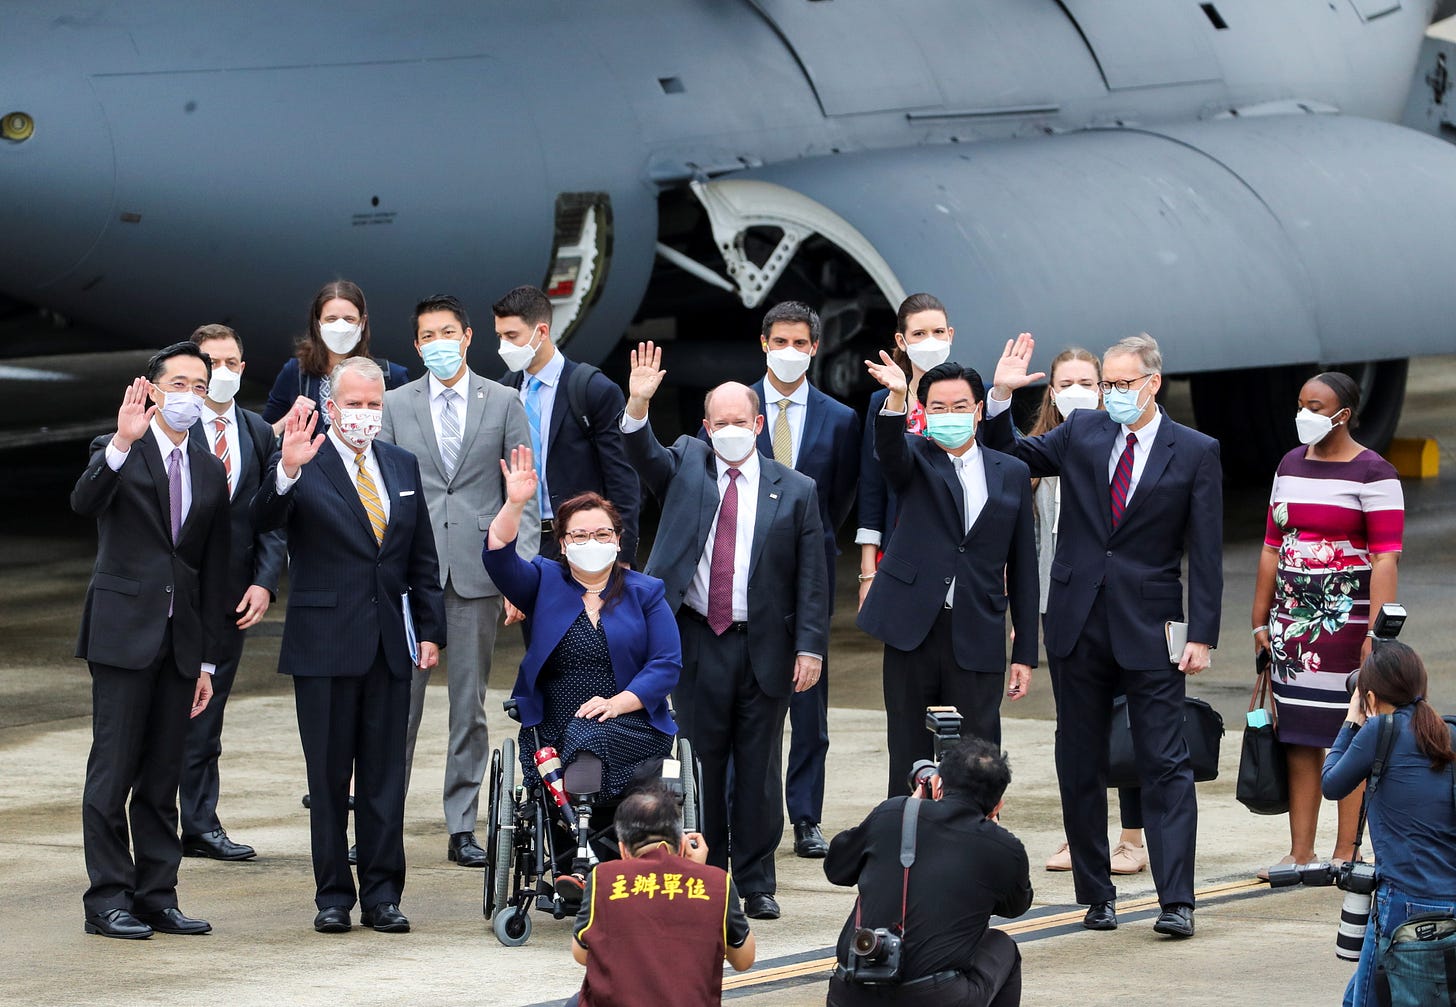 U.S. Senators Tammy Duckworth (D-IL), Dan Sullivan (R-AK) and Chris Coons (D-DE) wave next to Taiwan Foreign Minister Joseph Wu and Brent Christensen, director of the American Institute in Taiwan, after their arrival via a U.S. Air Force freighter at Taipei Songshan Airport in Taipei, Taiwan June 6, 2021. Central News Agency/Pool via REUTERS